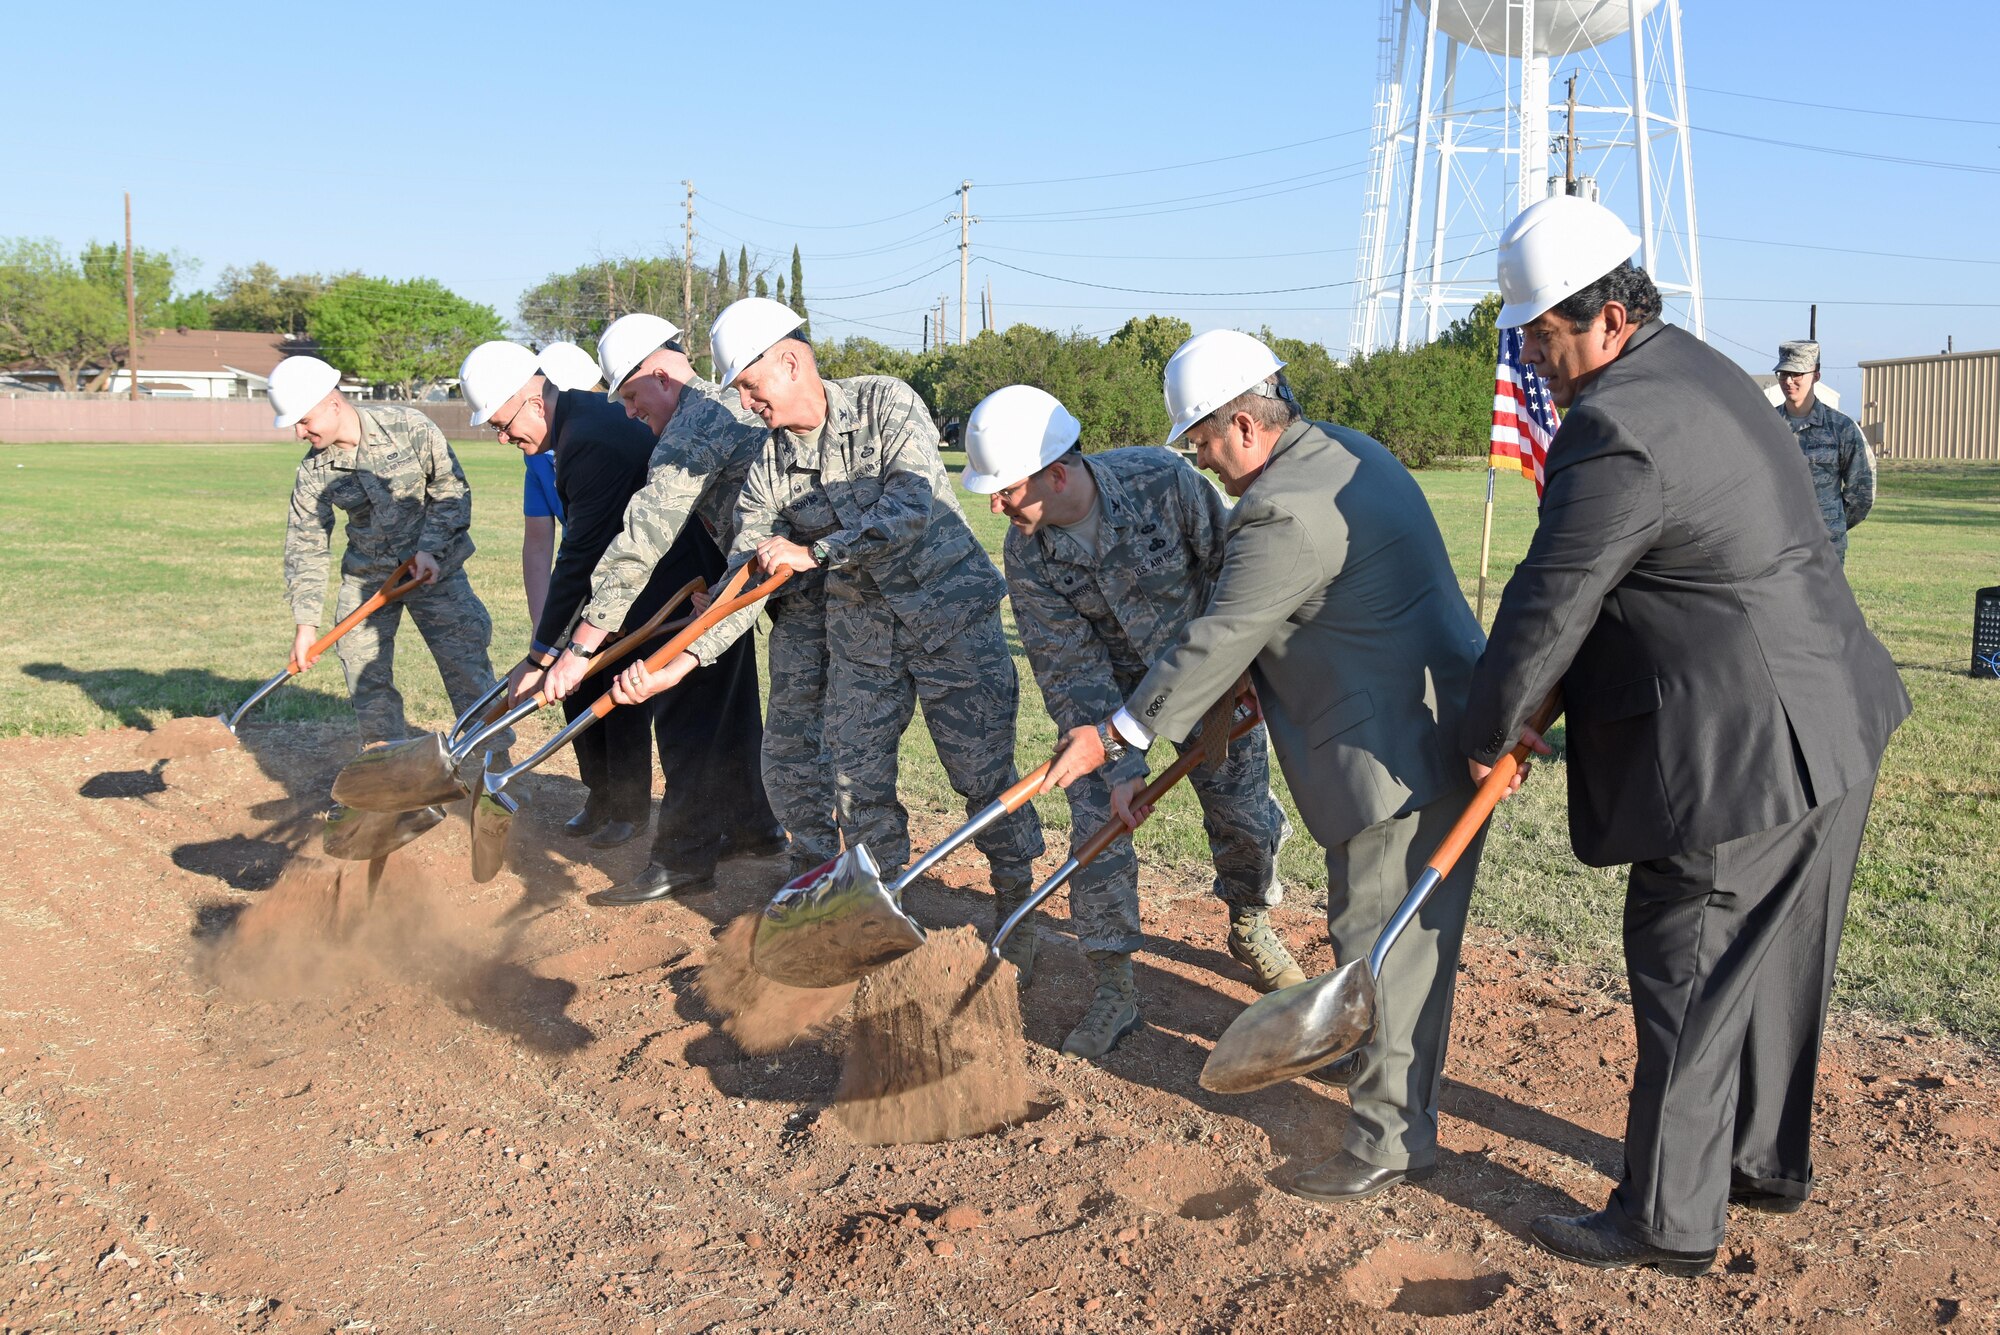 U.S. Air Force Col. Michael Downs, 17th Training Wing Commander, and team Goodfellow members break ground for the new temporary lodging facility near the base theater on Goodfellow Air Force Base, Texas March 20, 2017. The new TLF building is due for completion in late 2018. (U.S. Air Force photo by Staff Sgt. Joshua Edwards/Released)